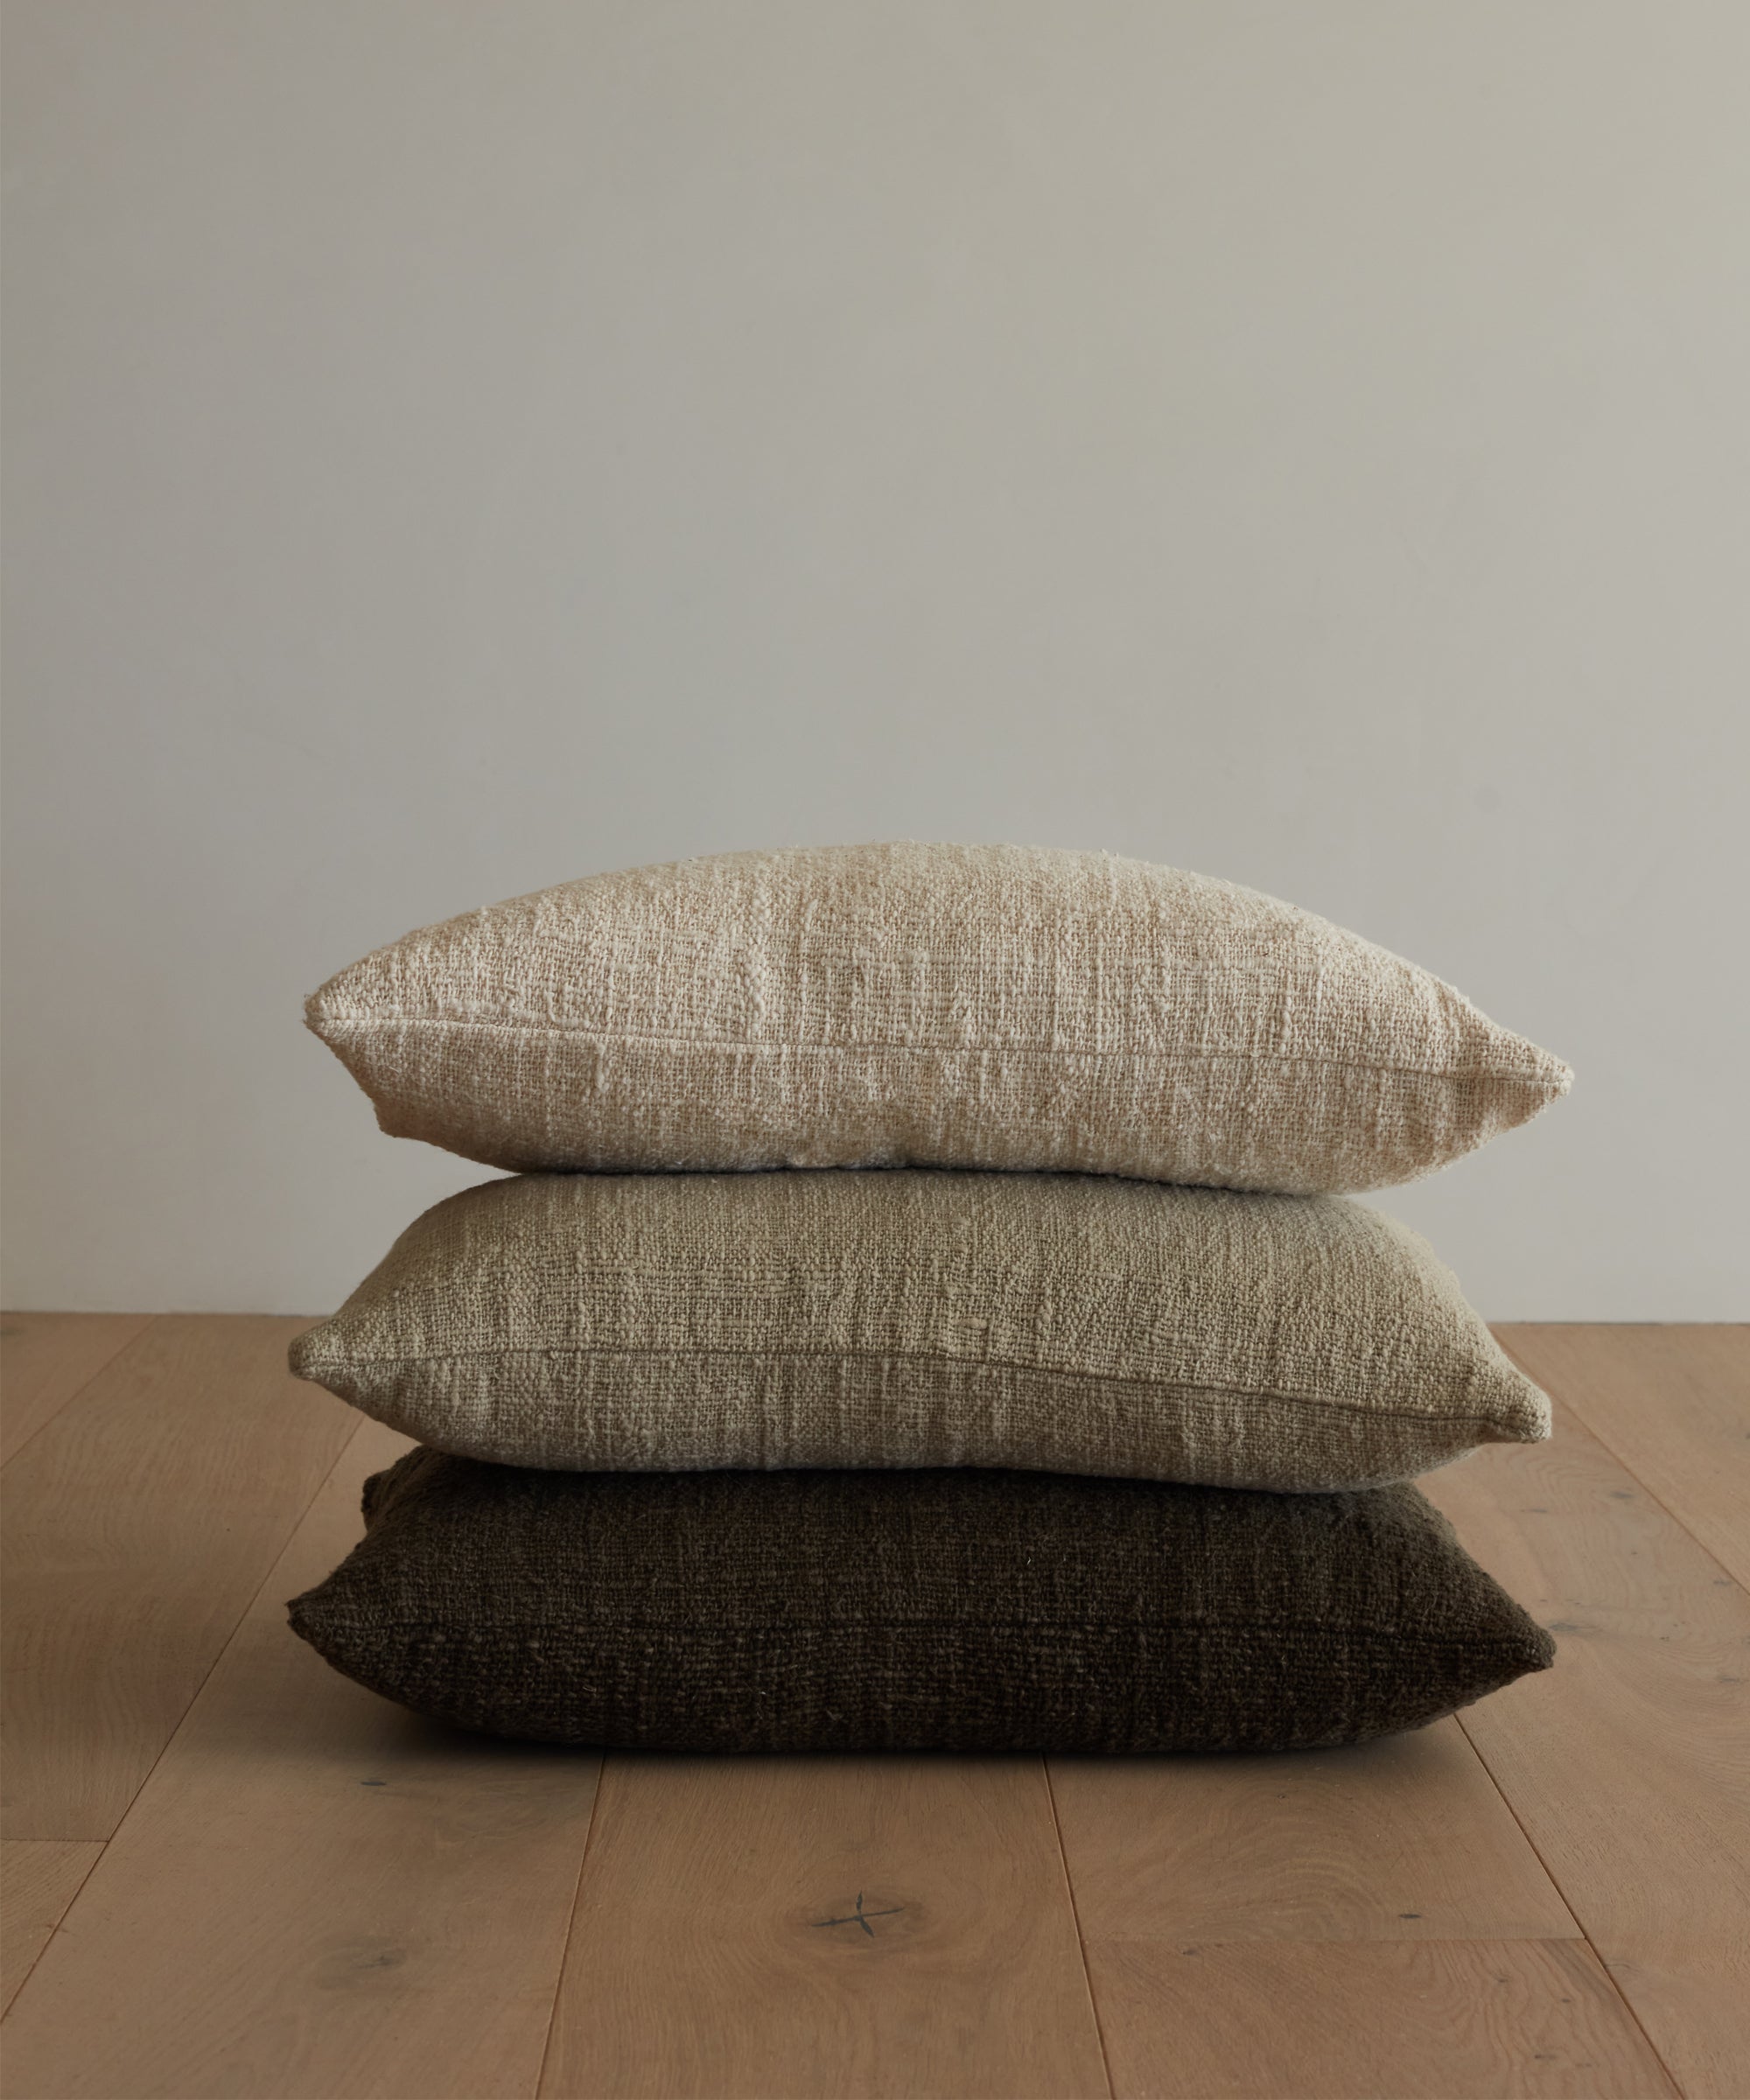 Meet the Pillows and Throws Made for Every Space – Jenni Kayne